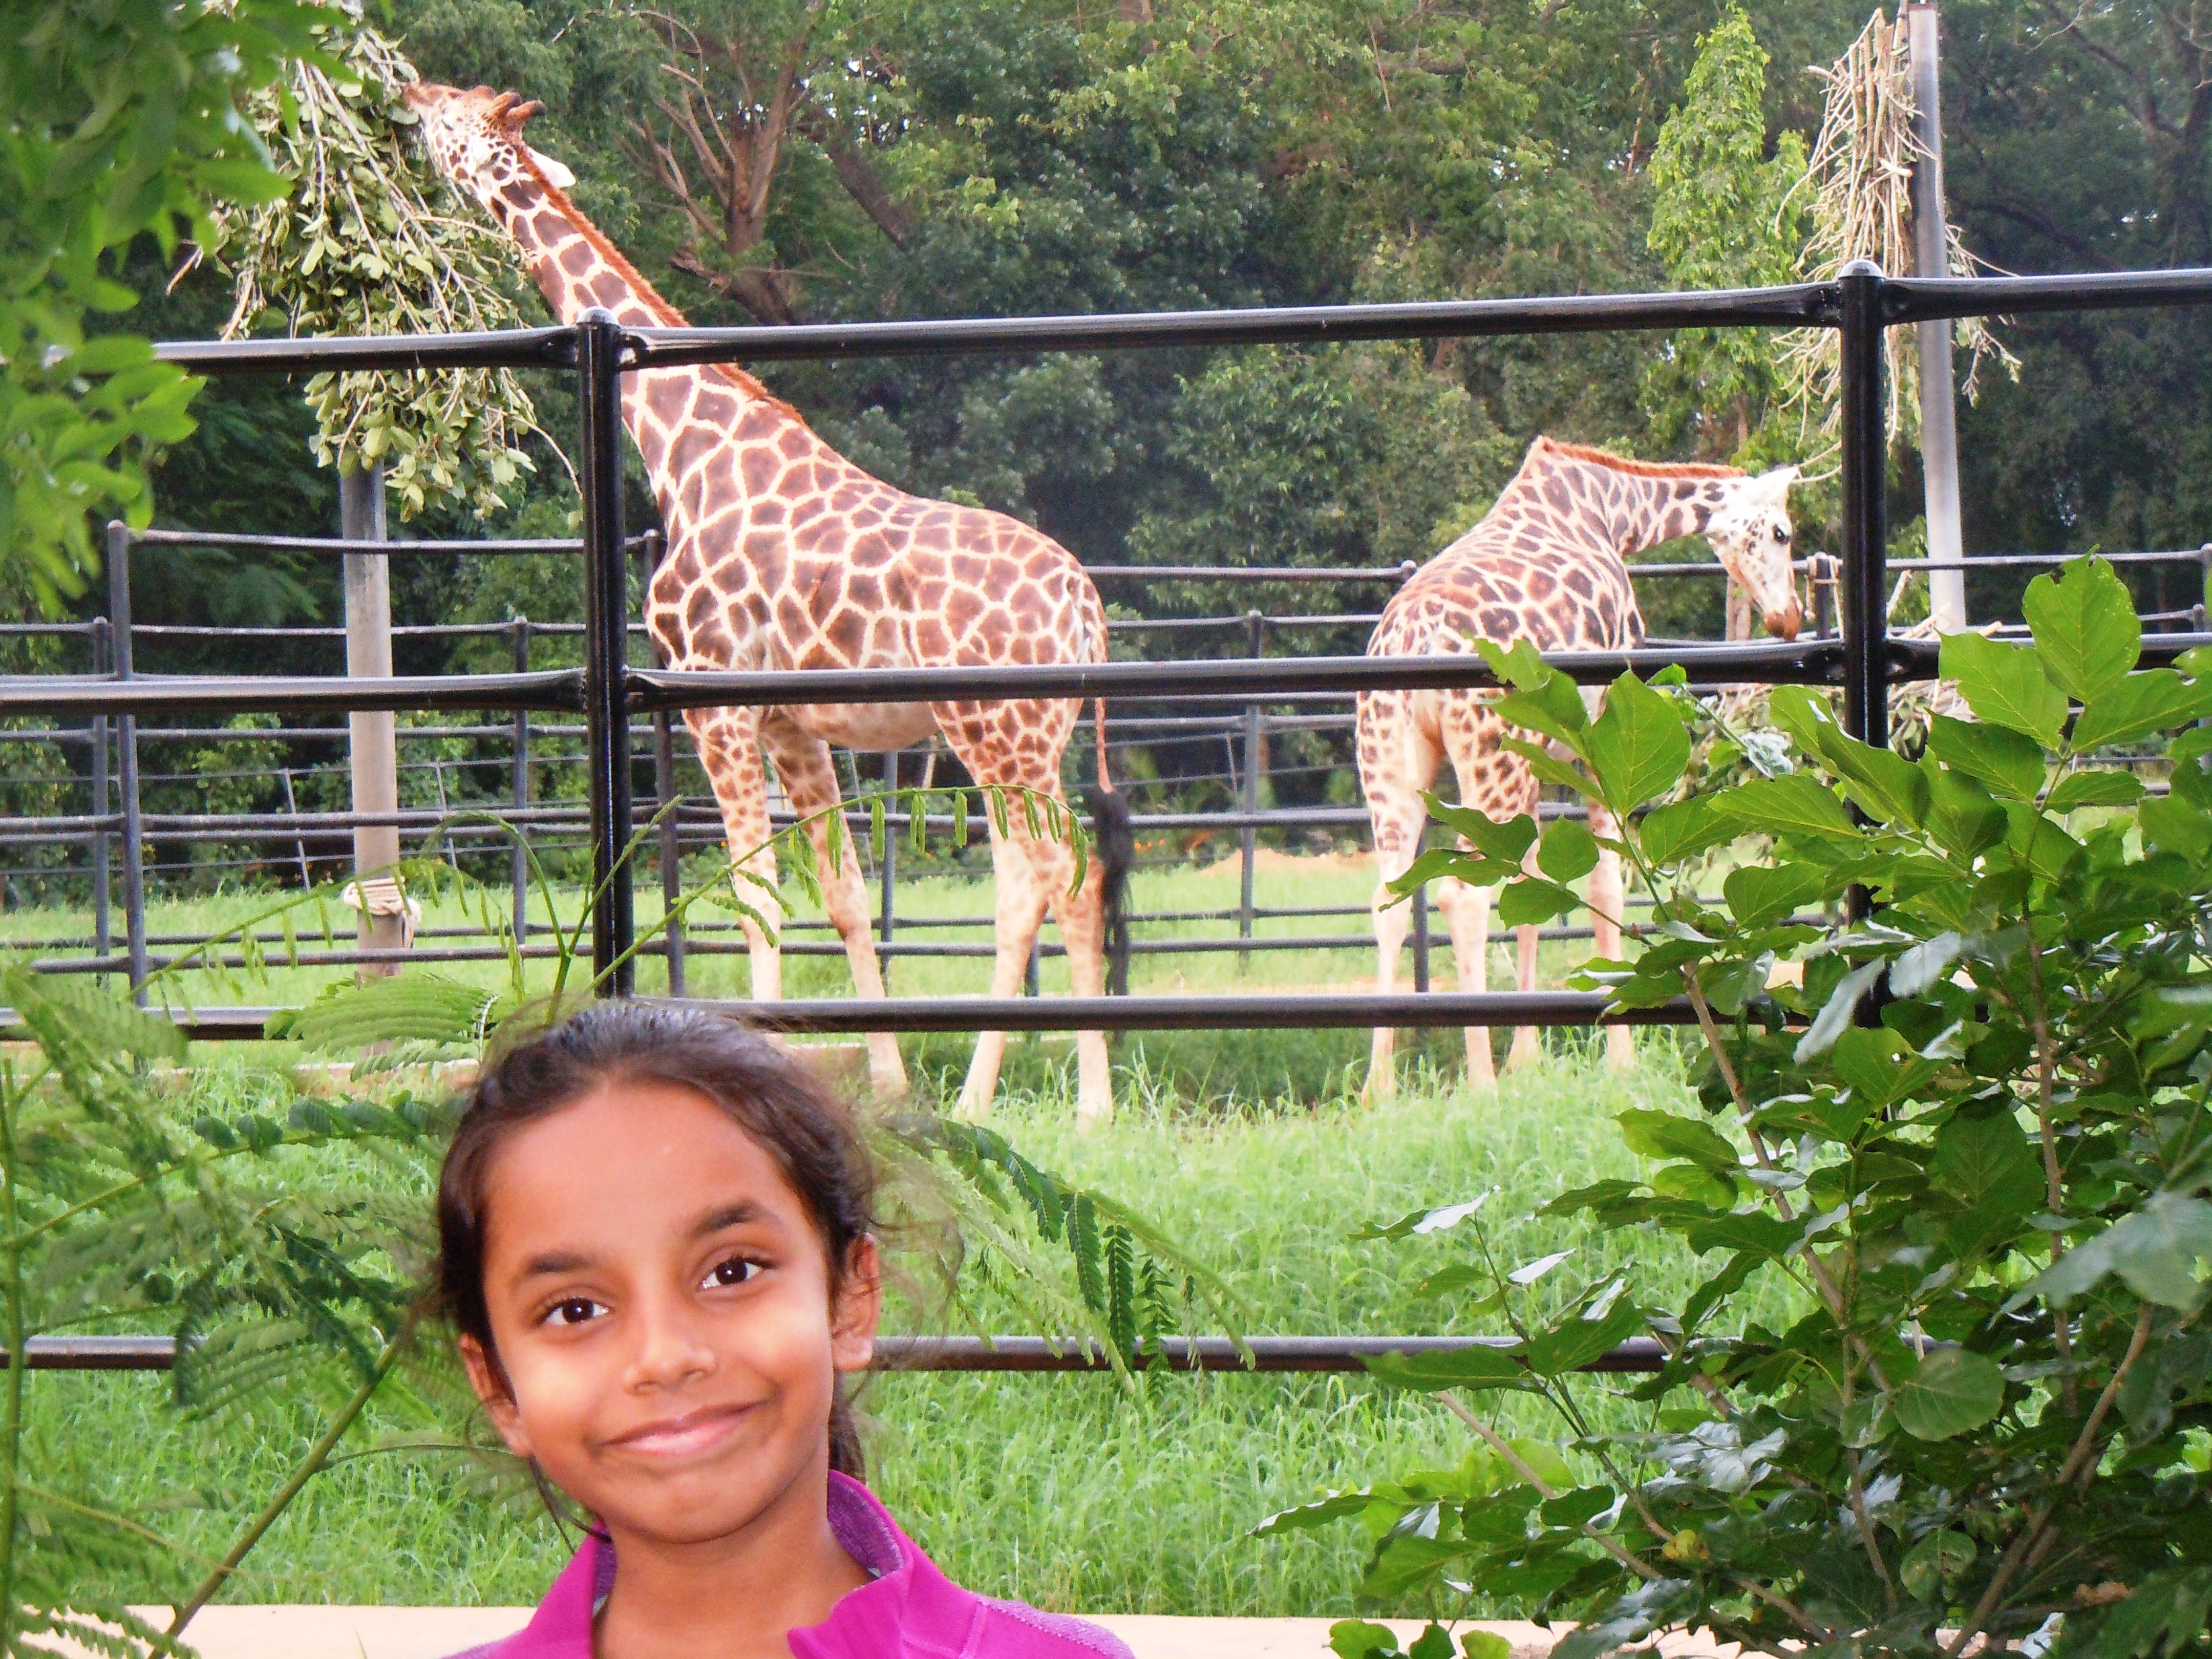 Posing in front of the giraffes